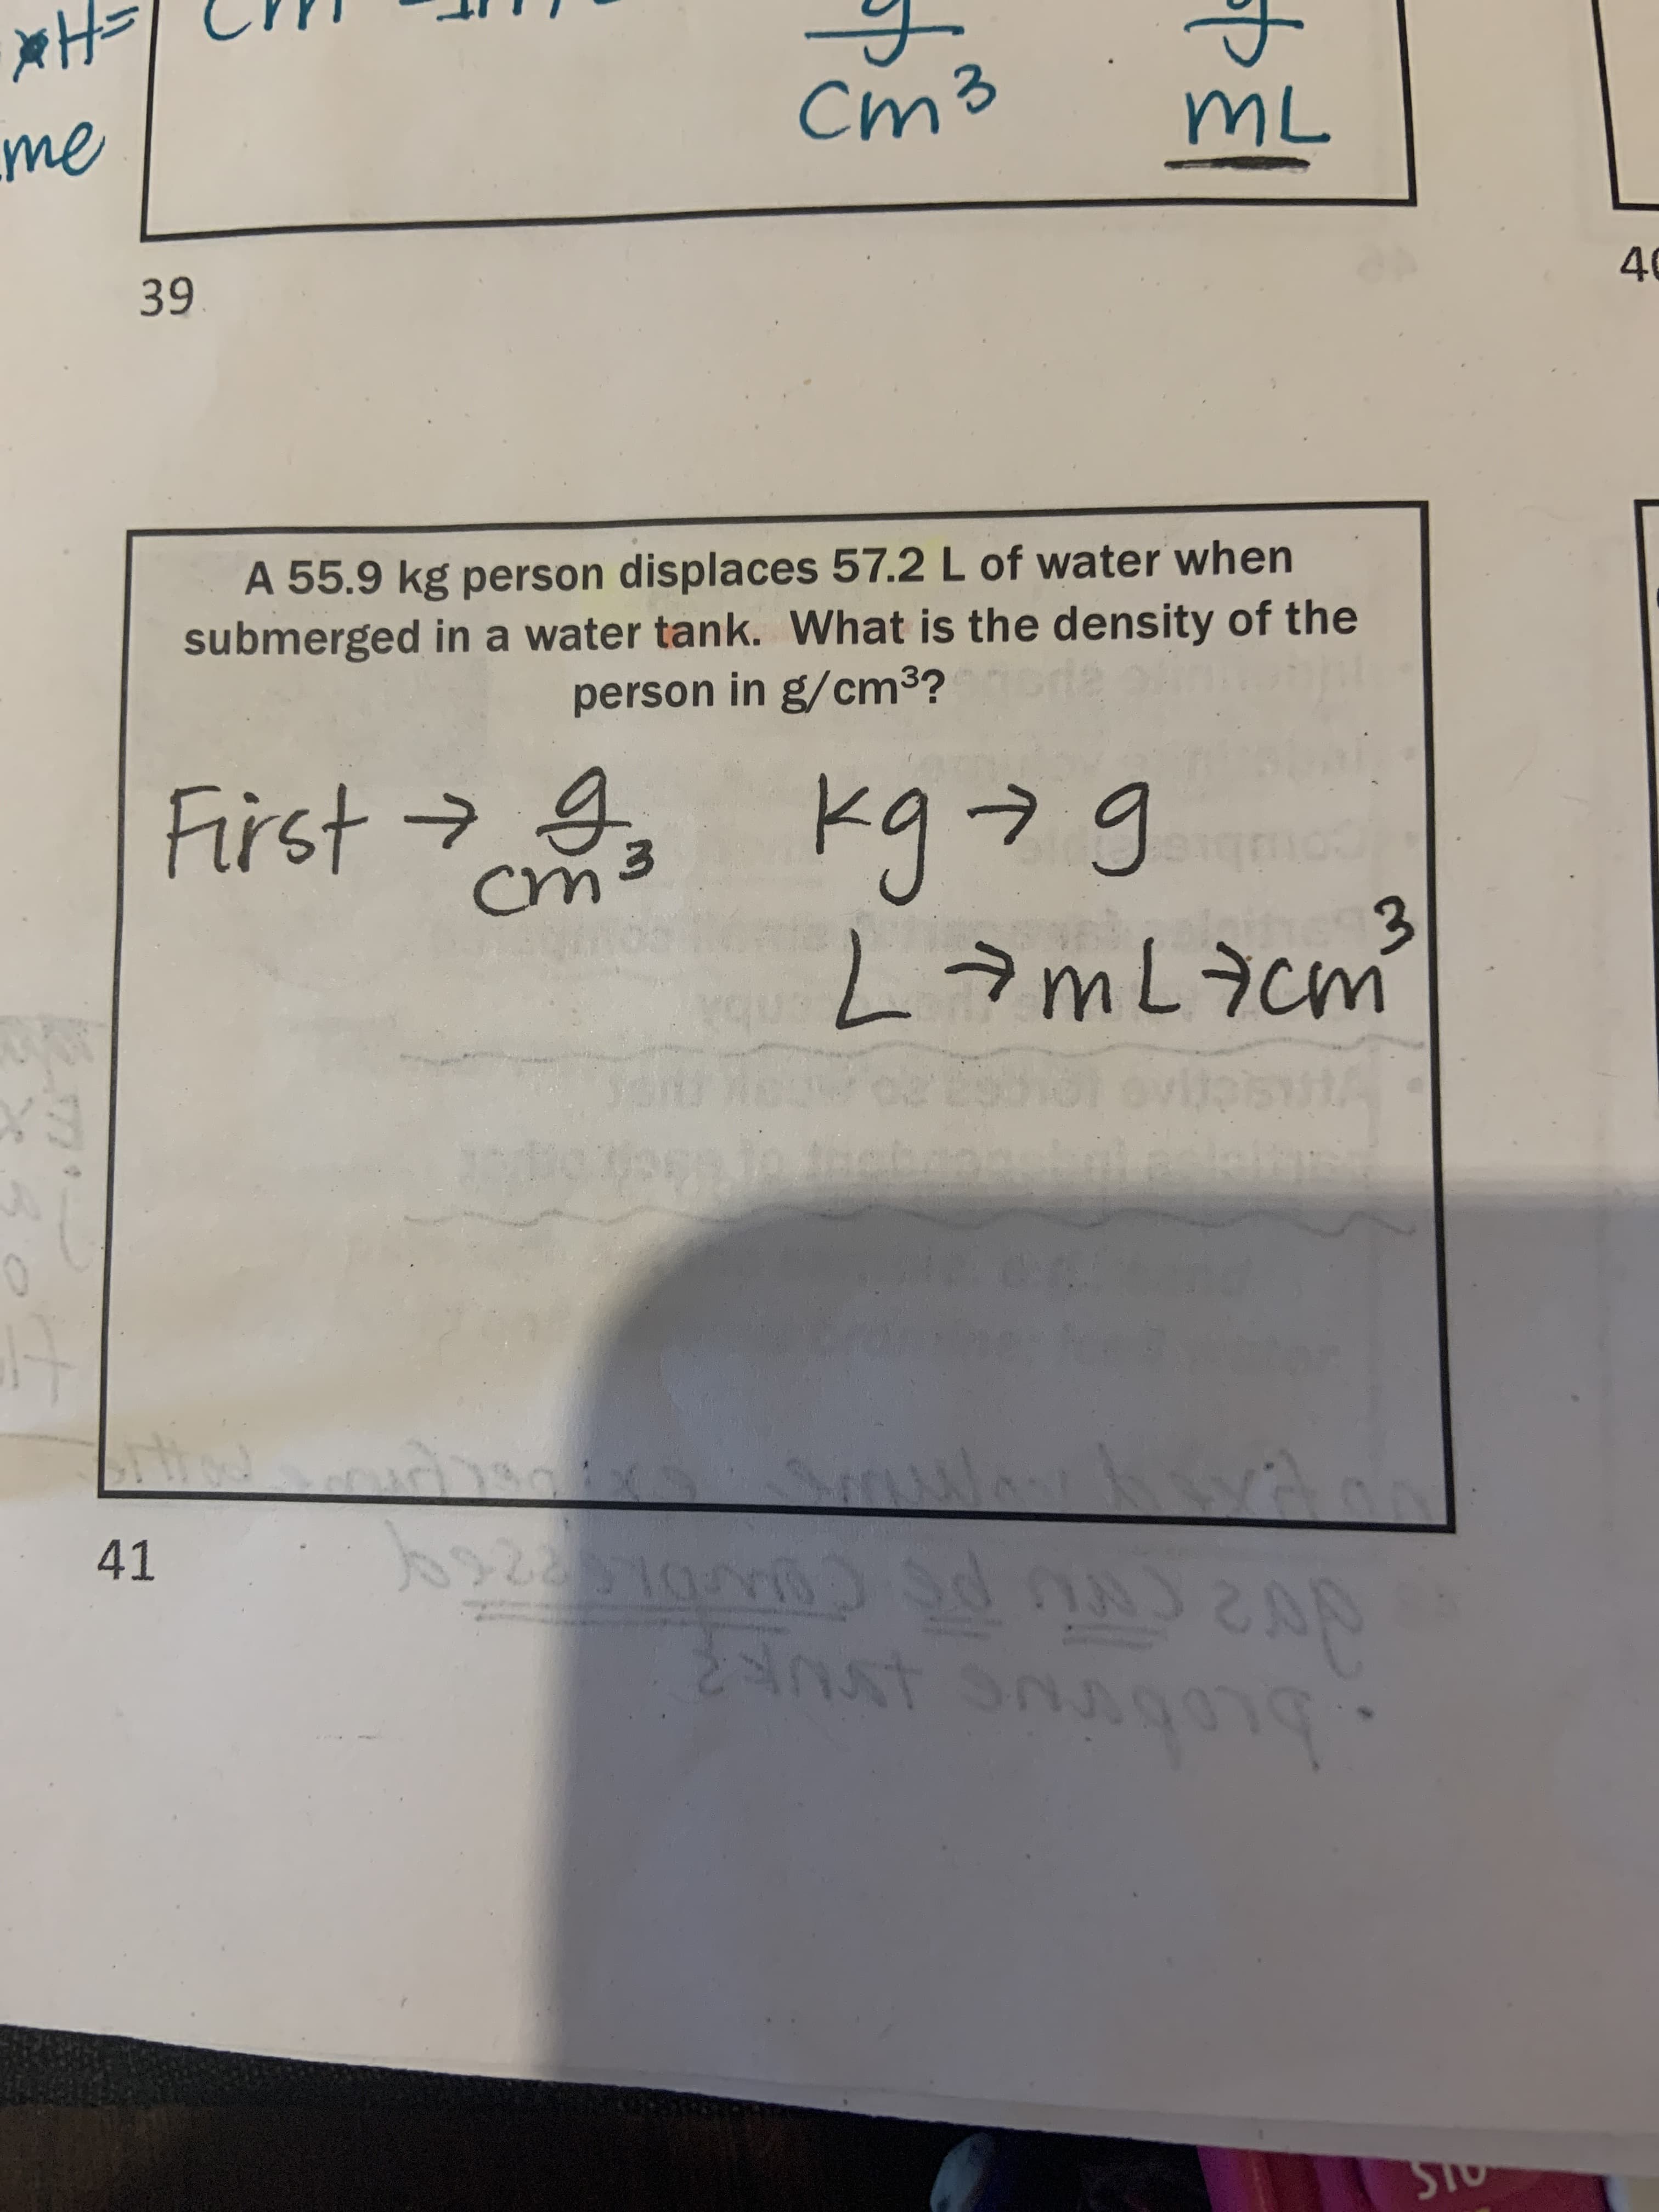 Cm3
me
39
40
A 55.9 kg person displaces 57.2 L of water when
submerged in a water tank. What is the density of the
person in g/cm3?
First > kg79
kg→g
LamLacmi
41
STO
